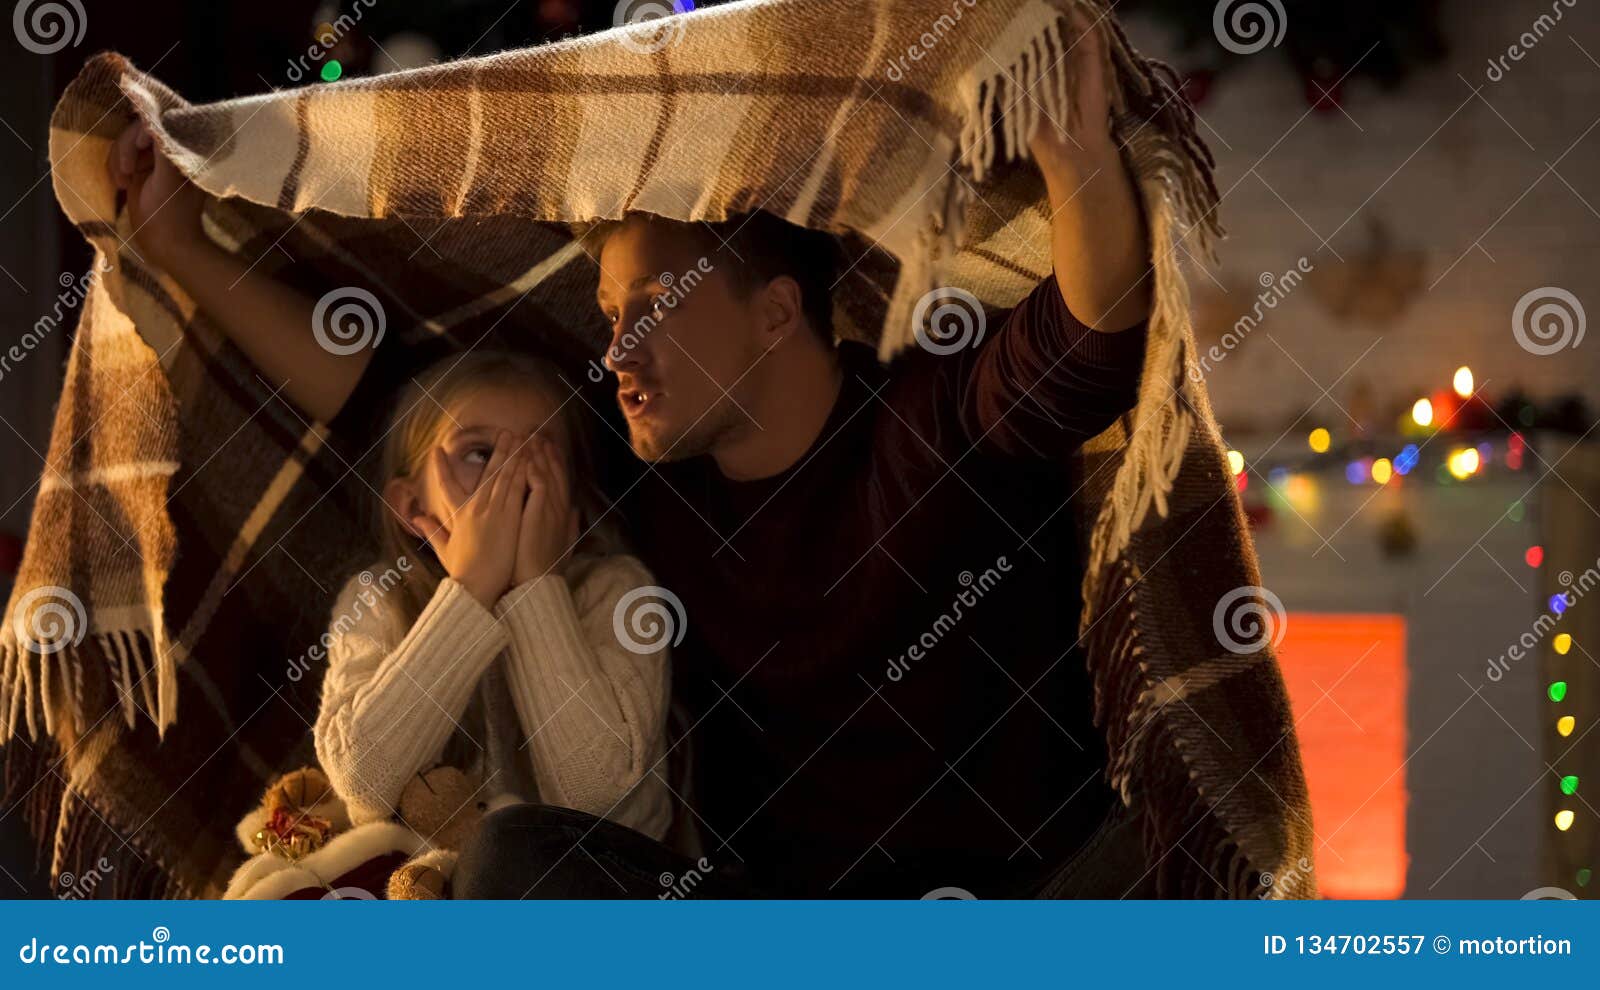 father telling horror christmas story for little girl sitting under cozy plaid